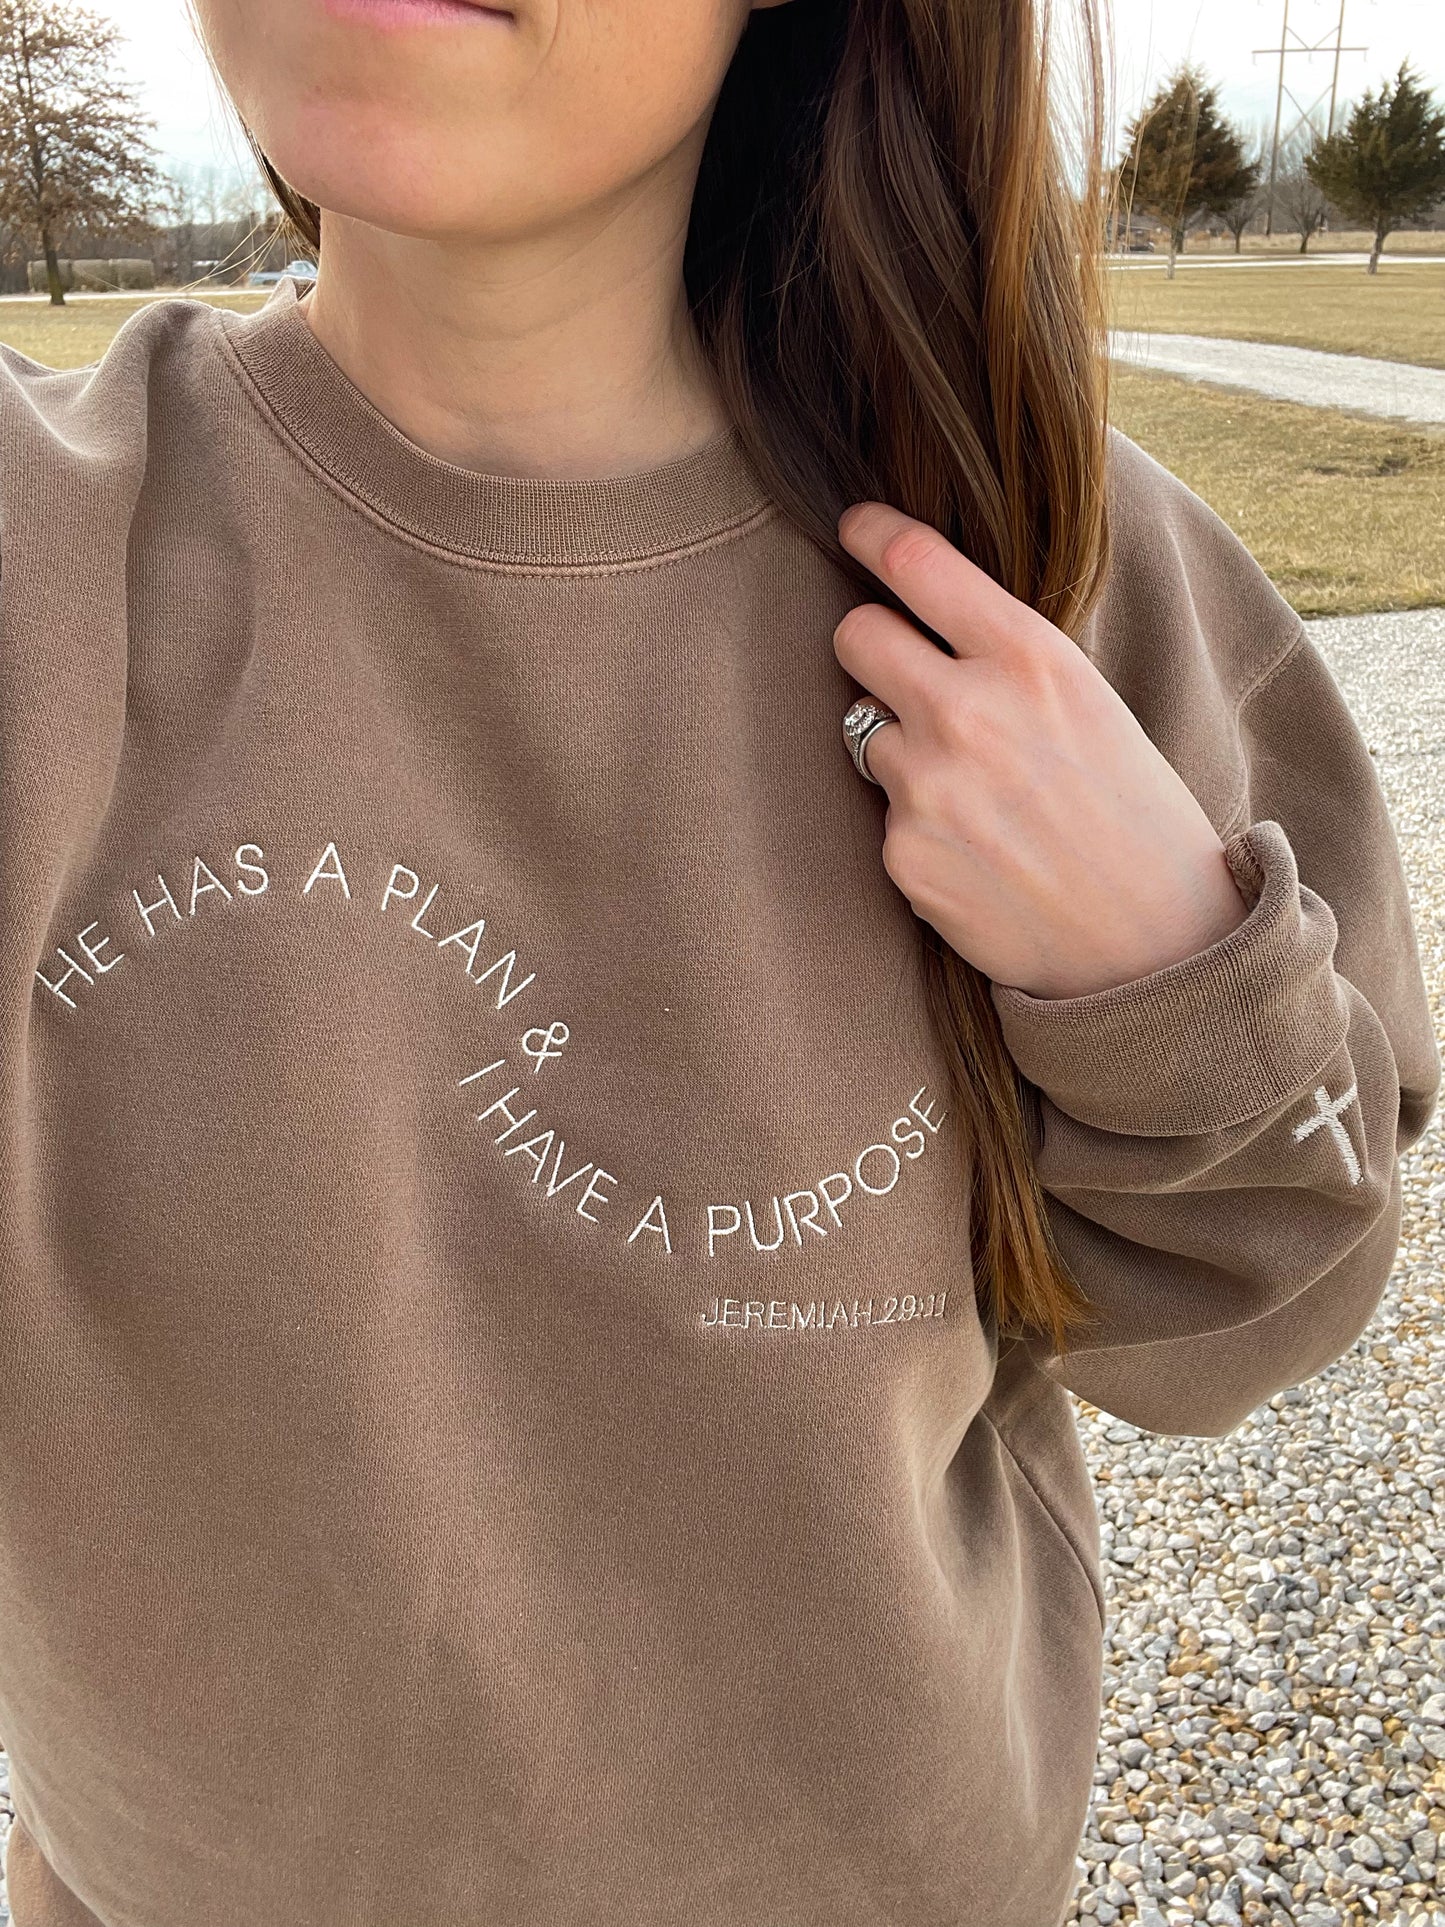 He Has a Plan and I Have a Purpose Embroidered Sweatshirt - Adult